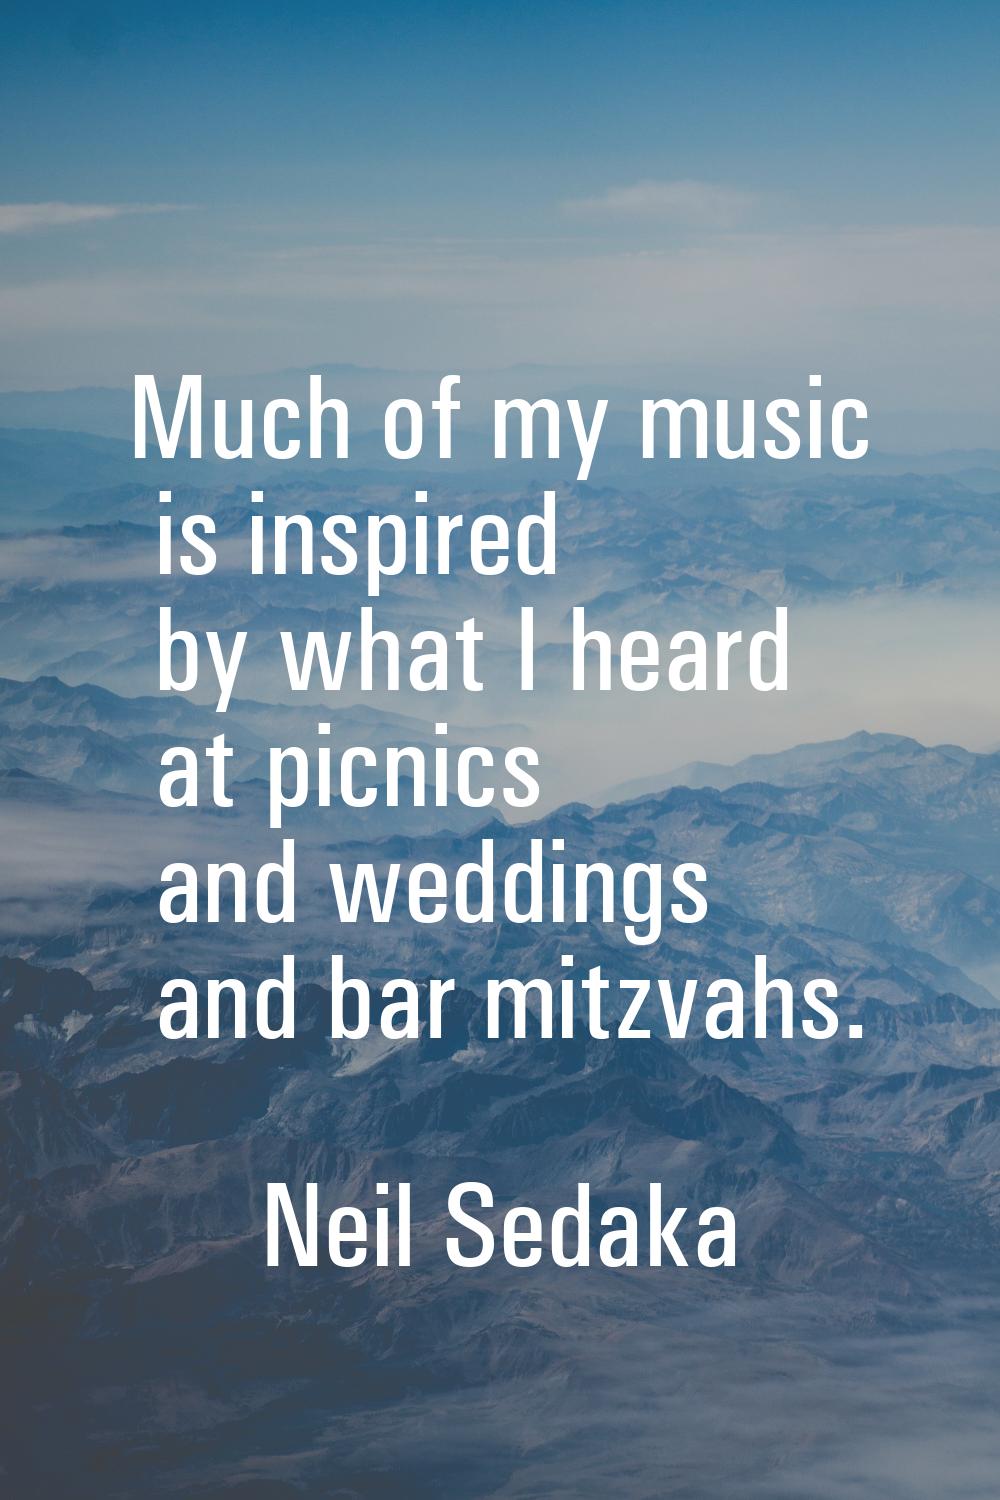 Much of my music is inspired by what I heard at picnics and weddings and bar mitzvahs.